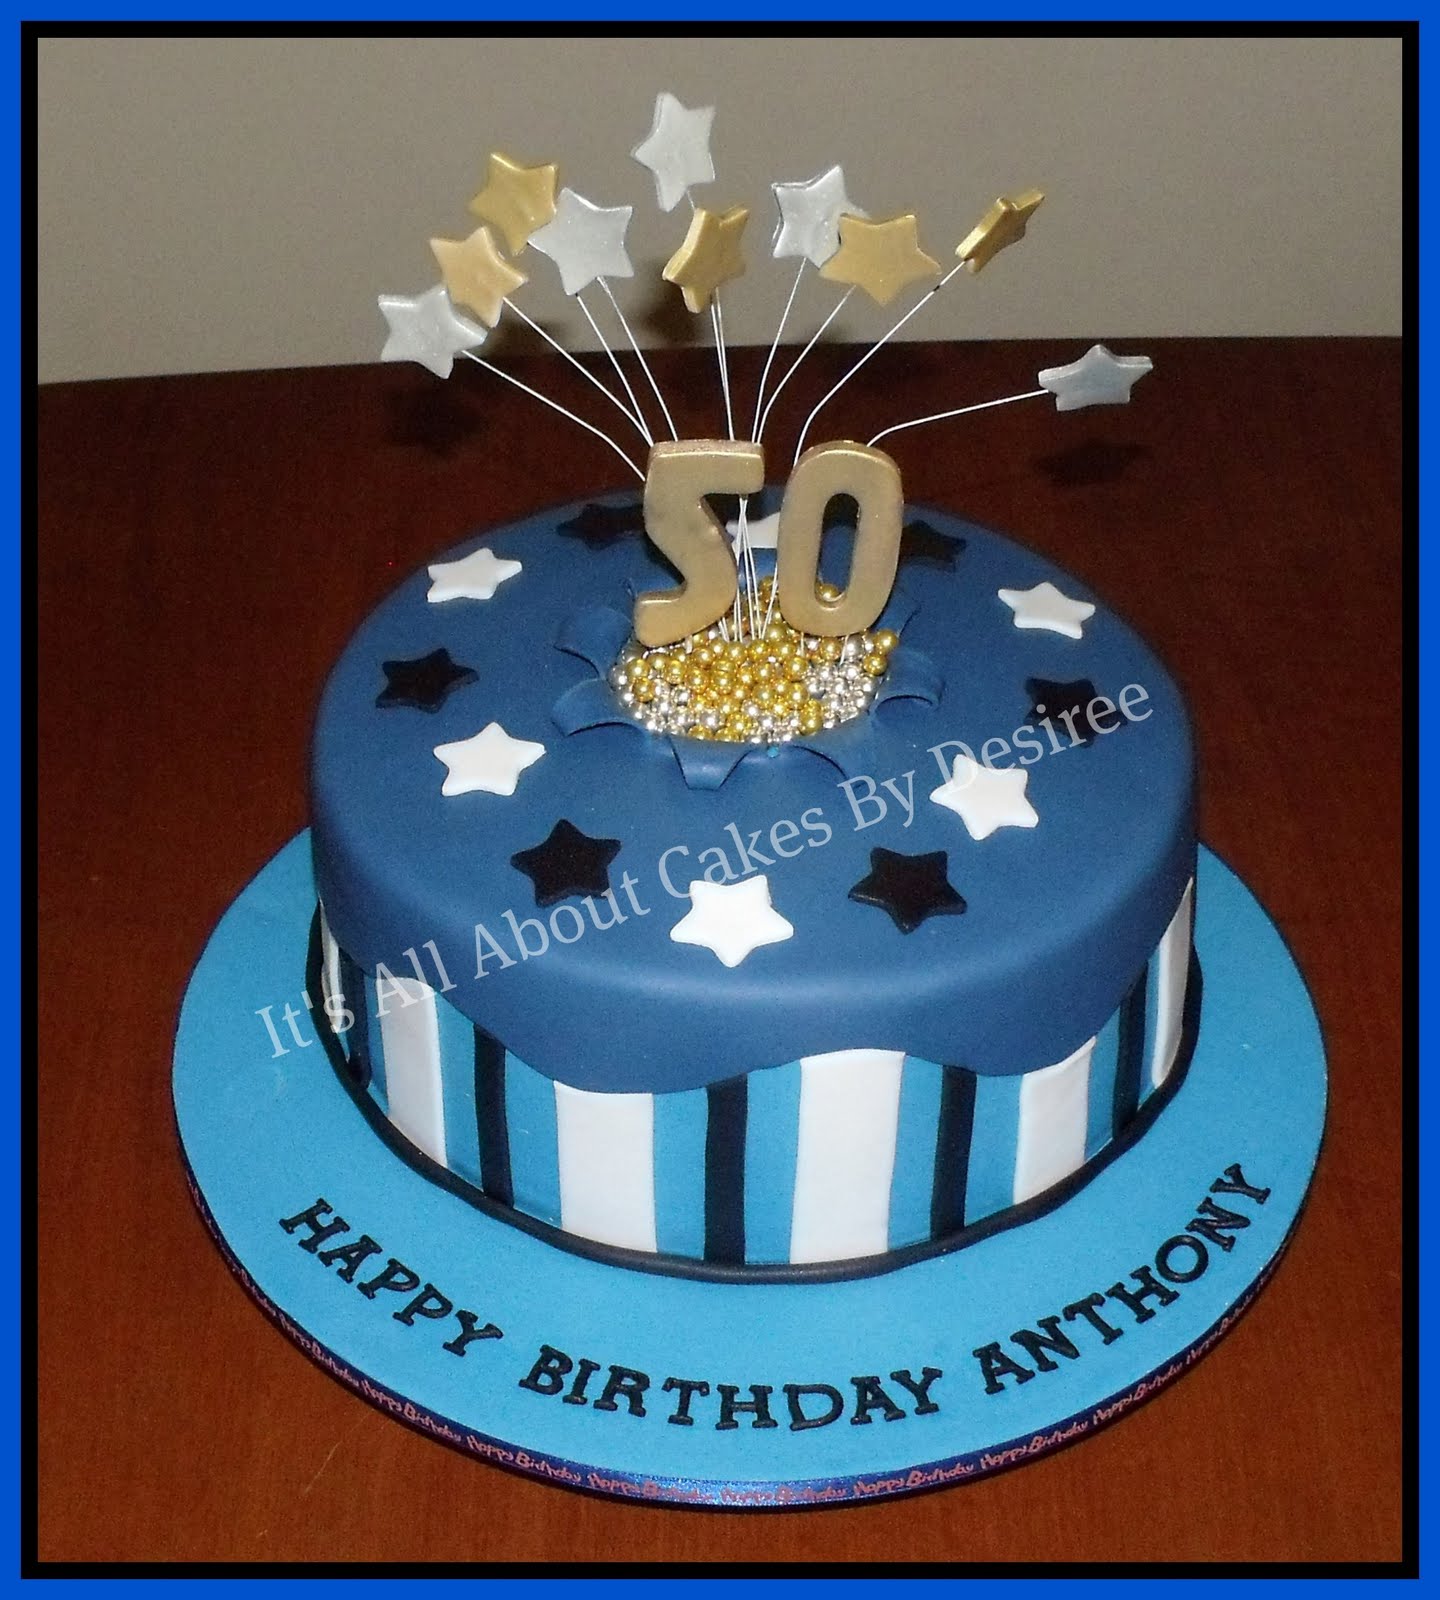 50th birthday cakes for men - Google Search | decorated ...